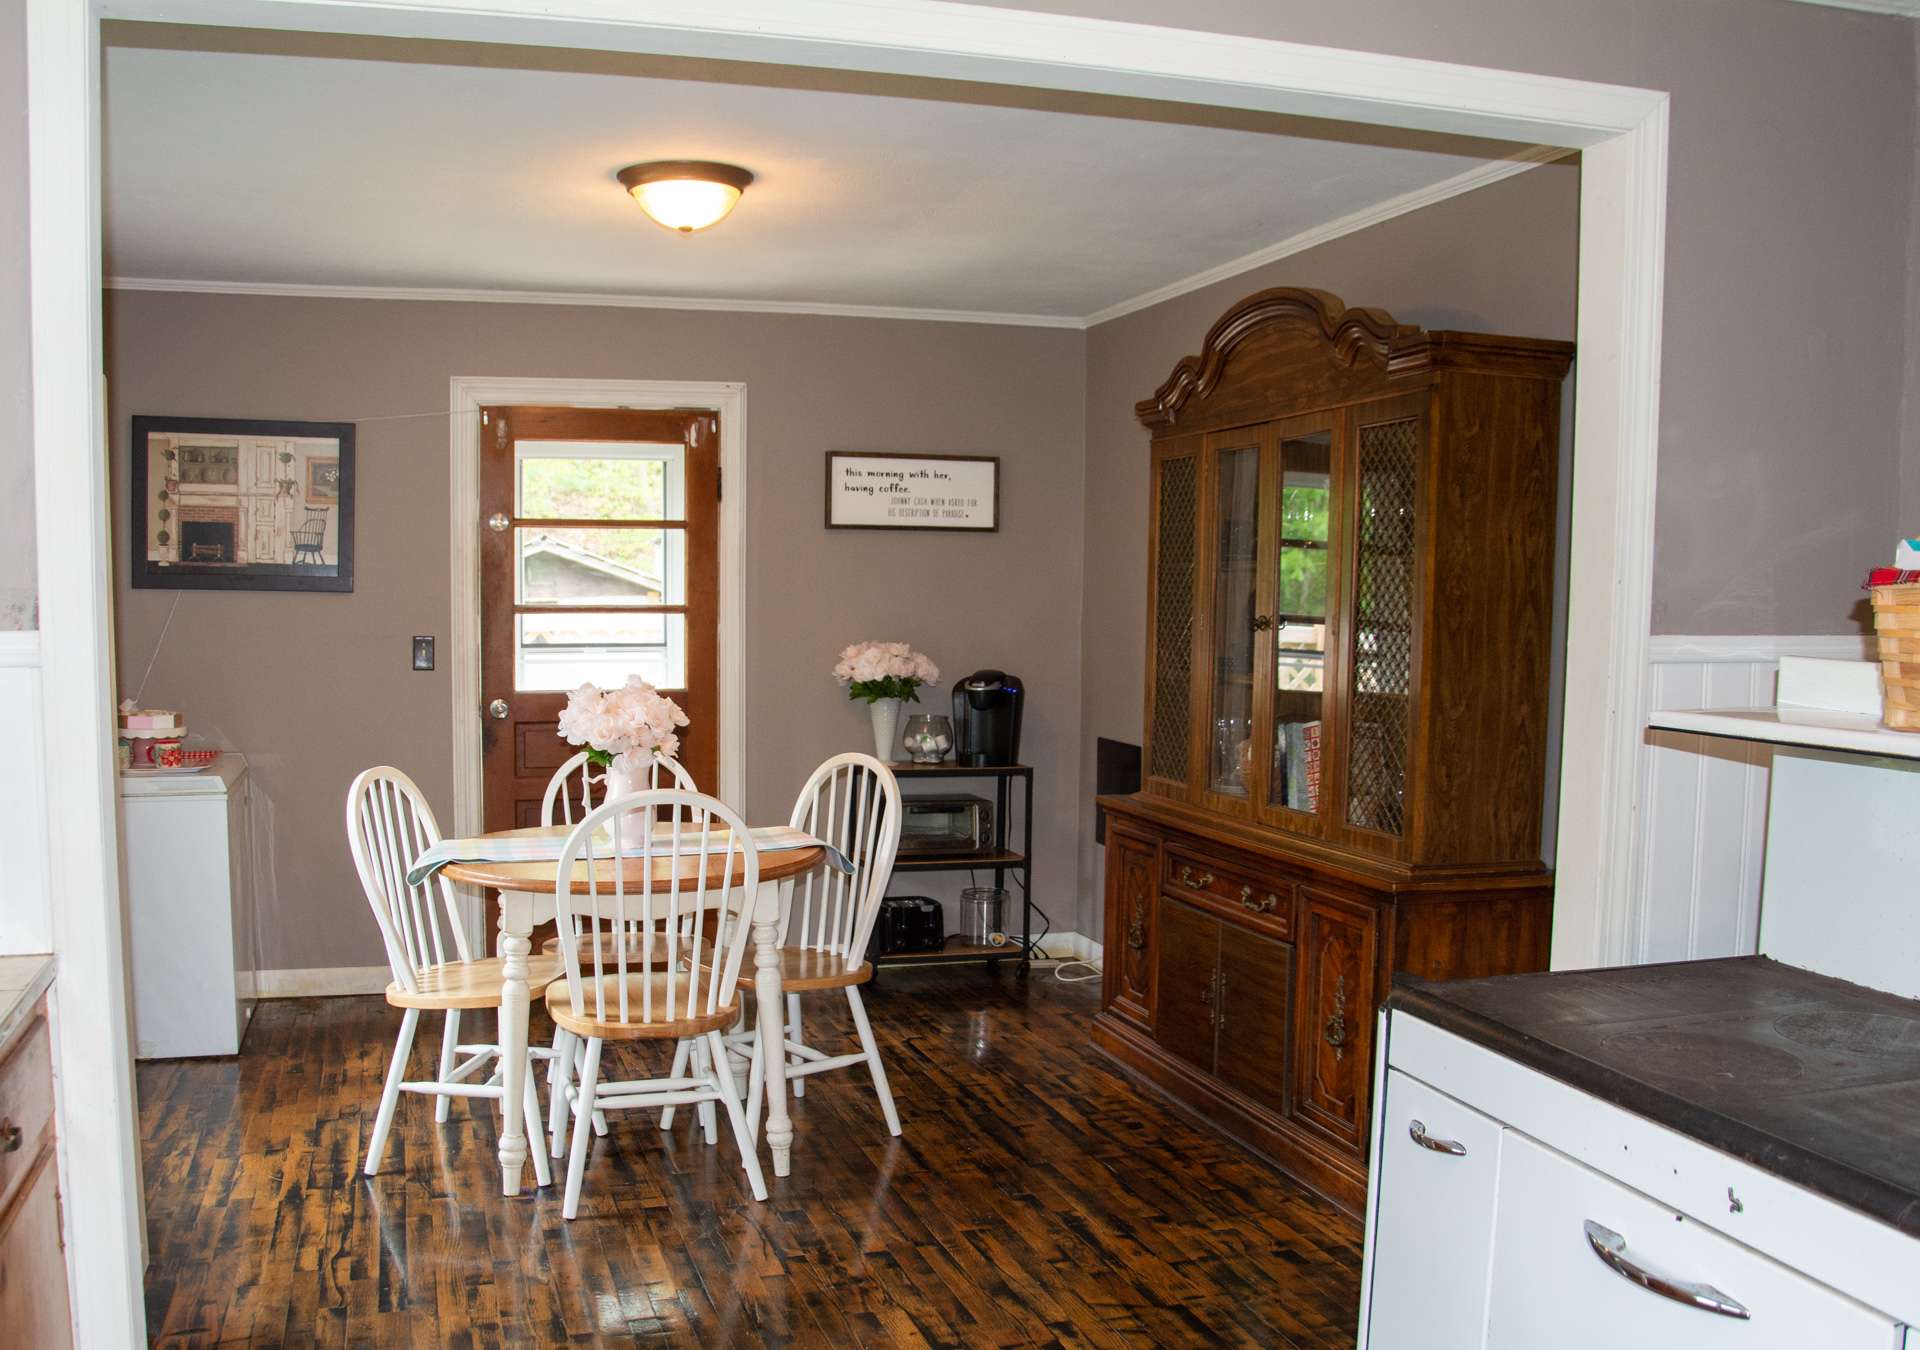 The dining area is open to the kitchen and also offers easy access to the outdoors.